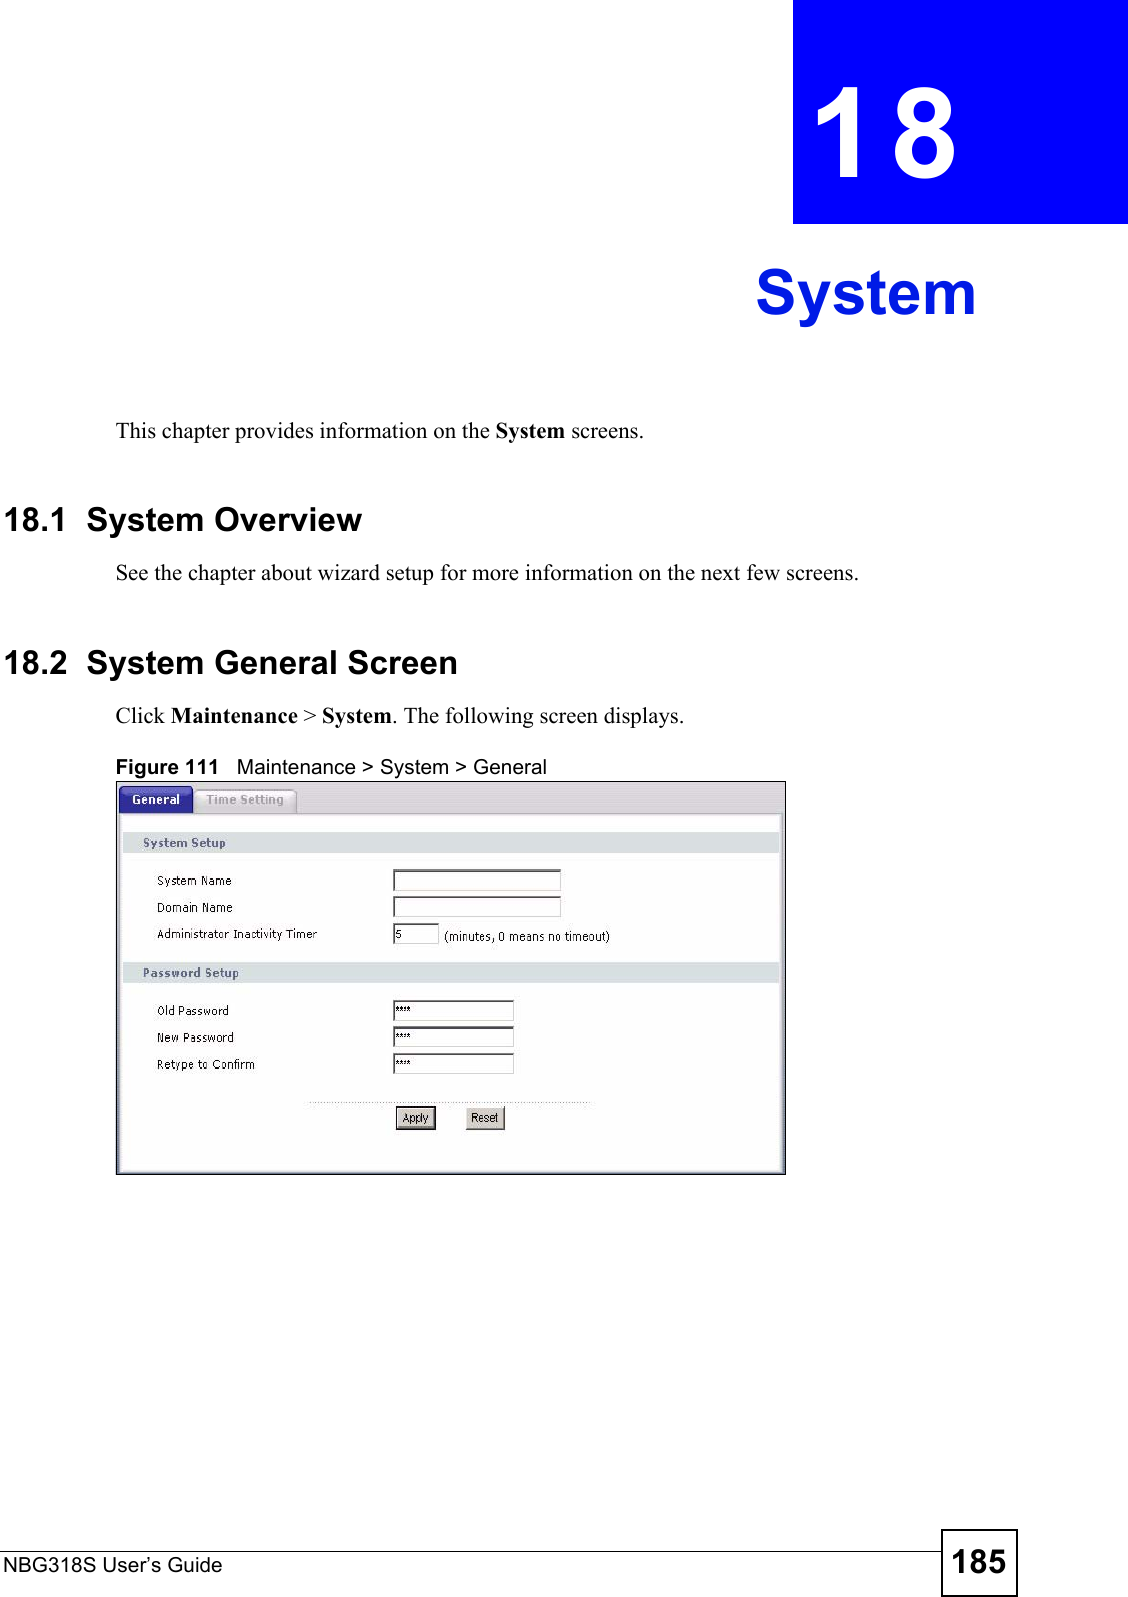 NBG318S User’s Guide 185CHAPTER  18 SystemThis chapter provides information on the System screens. 18.1  System OverviewSee the chapter about wizard setup for more information on the next few screens.18.2  System General Screen Click Maintenance &gt; System. The following screen displays.Figure 111   Maintenance &gt; System &gt; General 